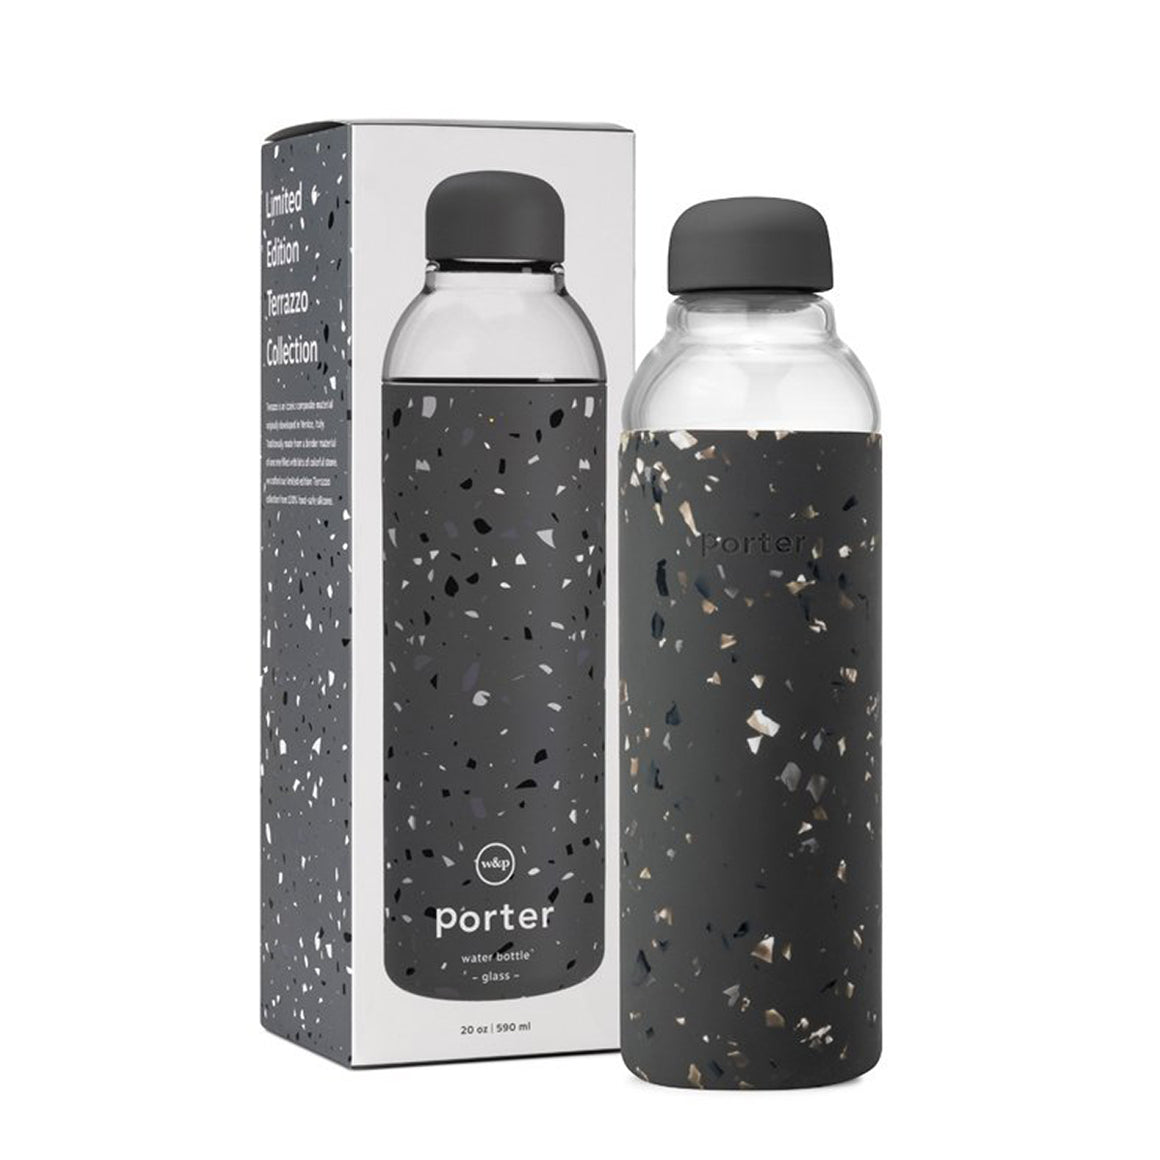 In front of a white and charcoal, tall packaging box is a cylindrical glass bottle with a terrazzo grey silicone sleeve and a grey curved lid. 